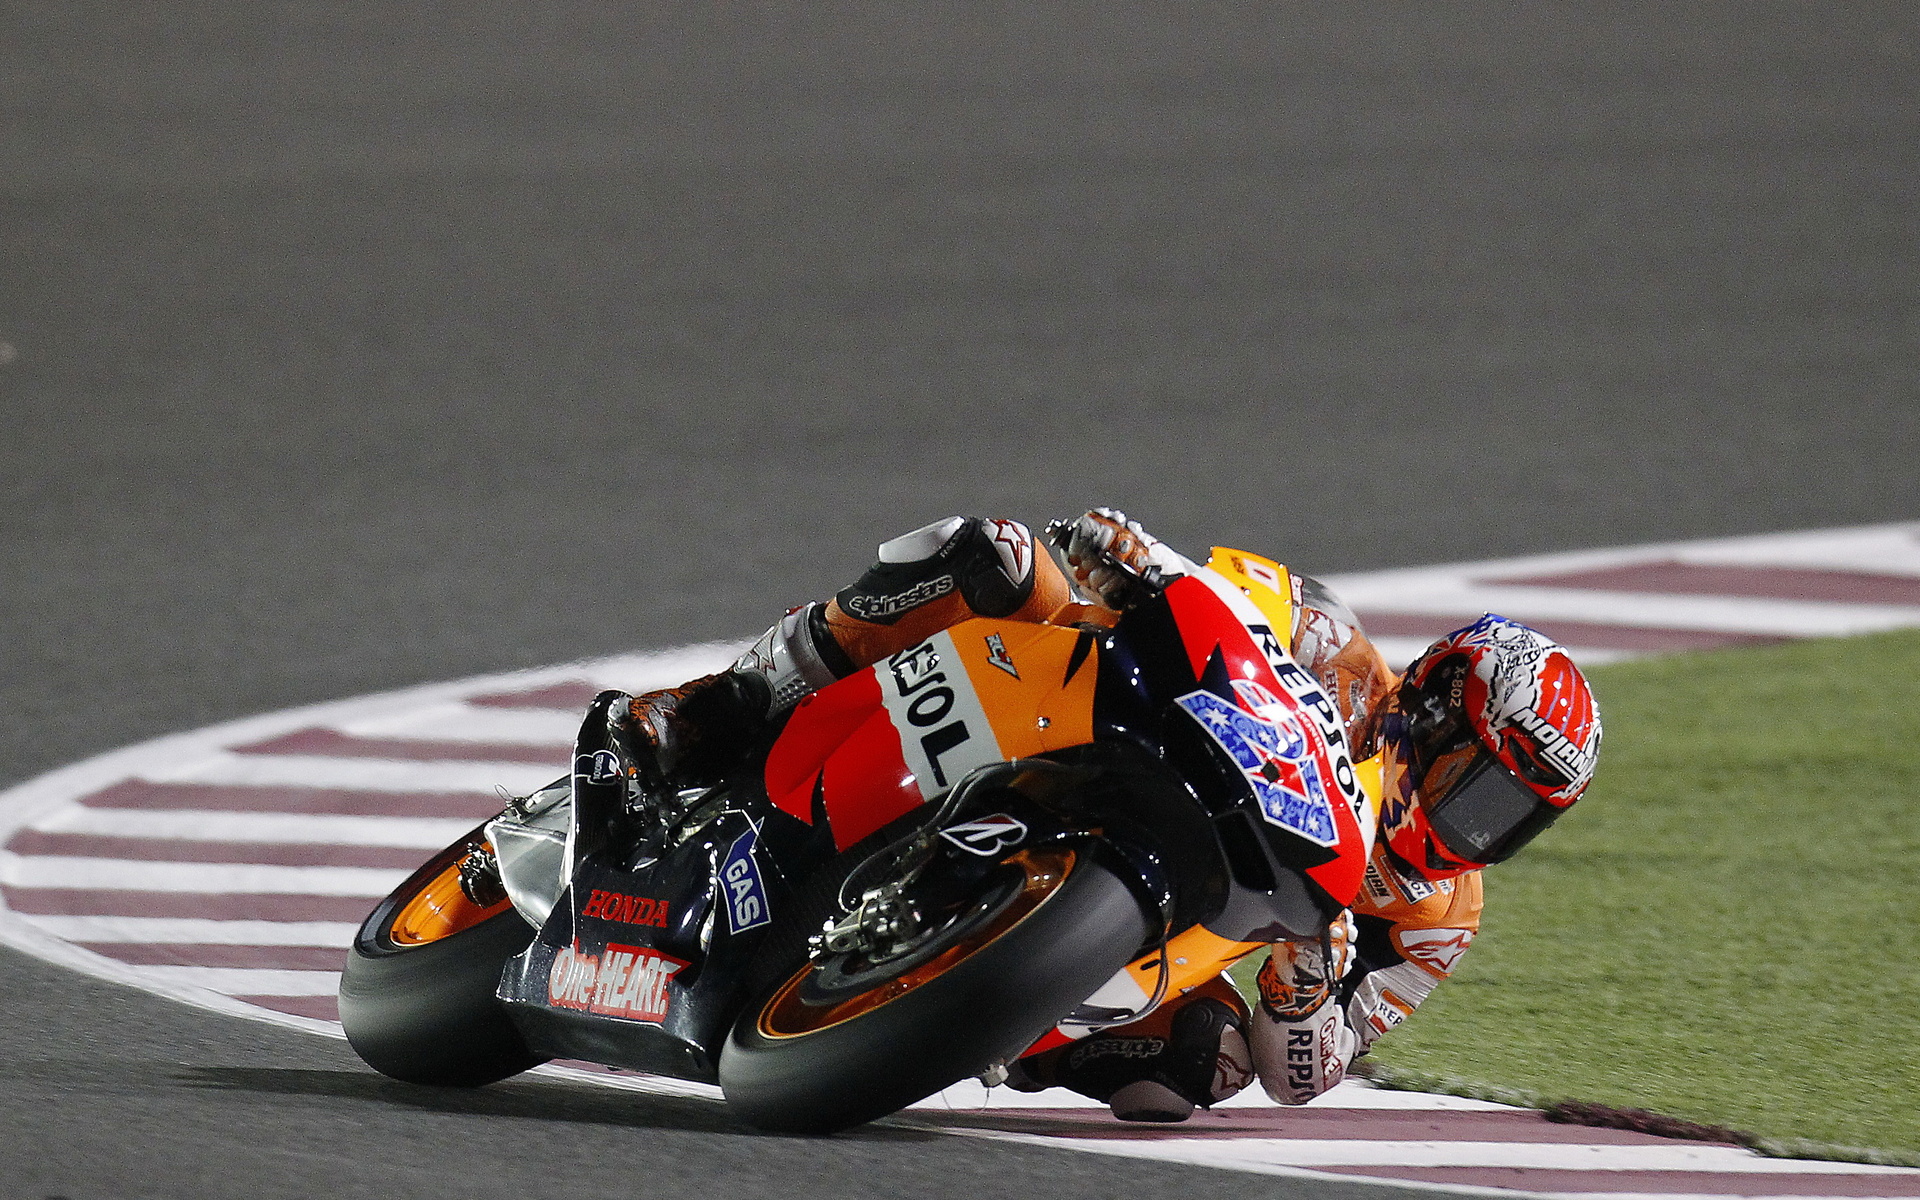 MotoGP Full HD Wallpaper and Background Image | 1920x1200 | ID:208101